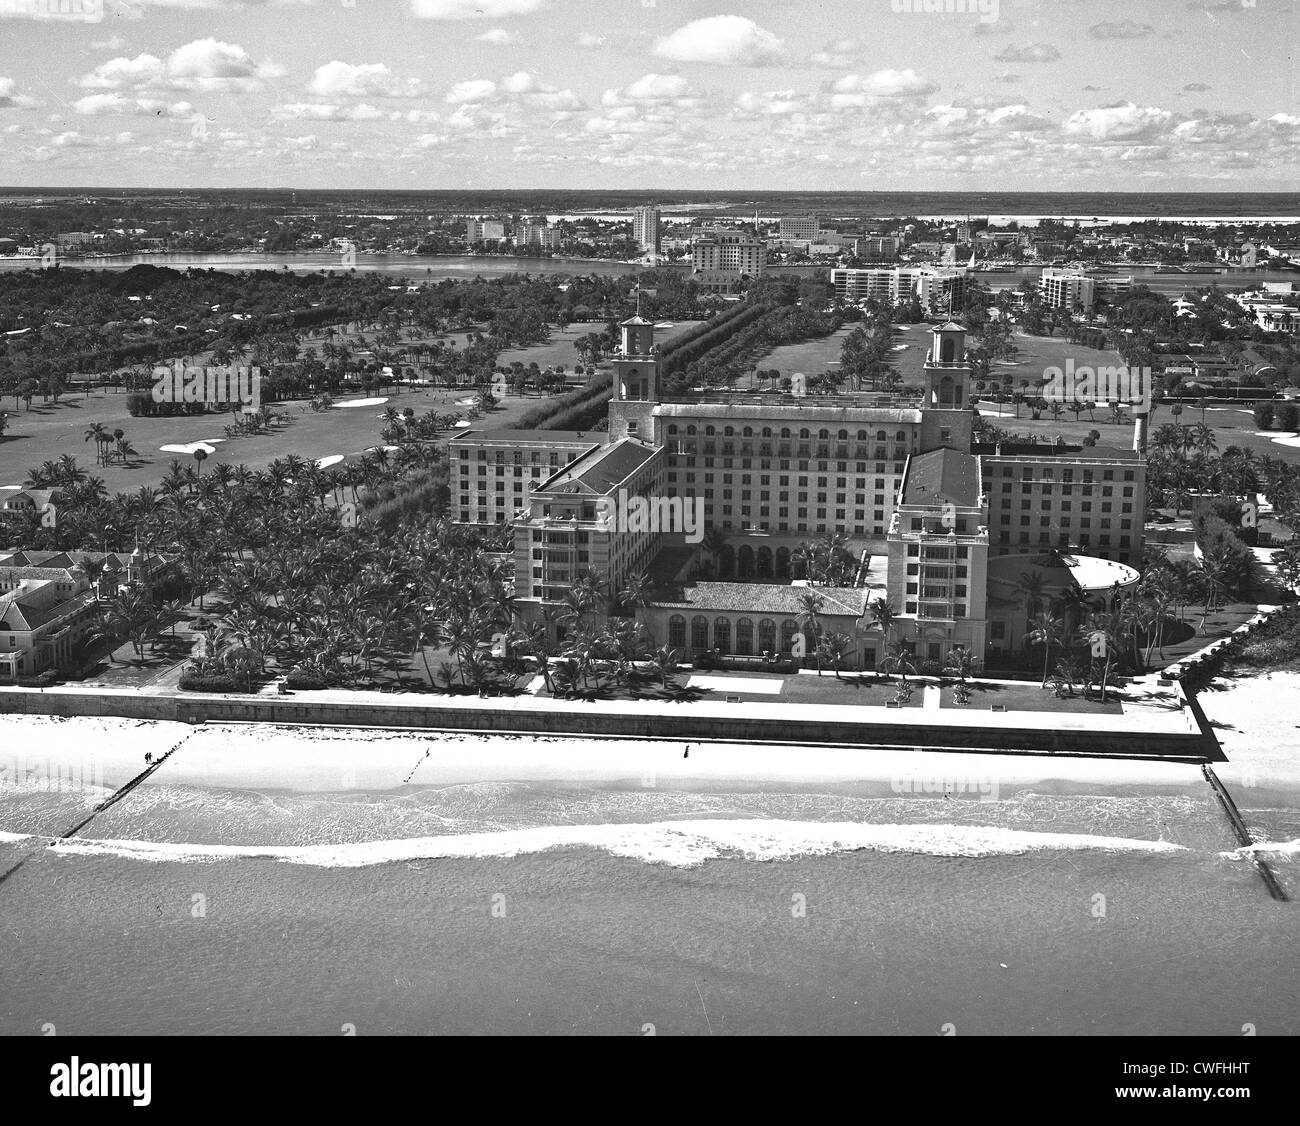 Aerial view of the famous Breakers Hotel, Palm Beach, Florida  with the city of West Palm Beach in the background, ca 1940 Stock Photo